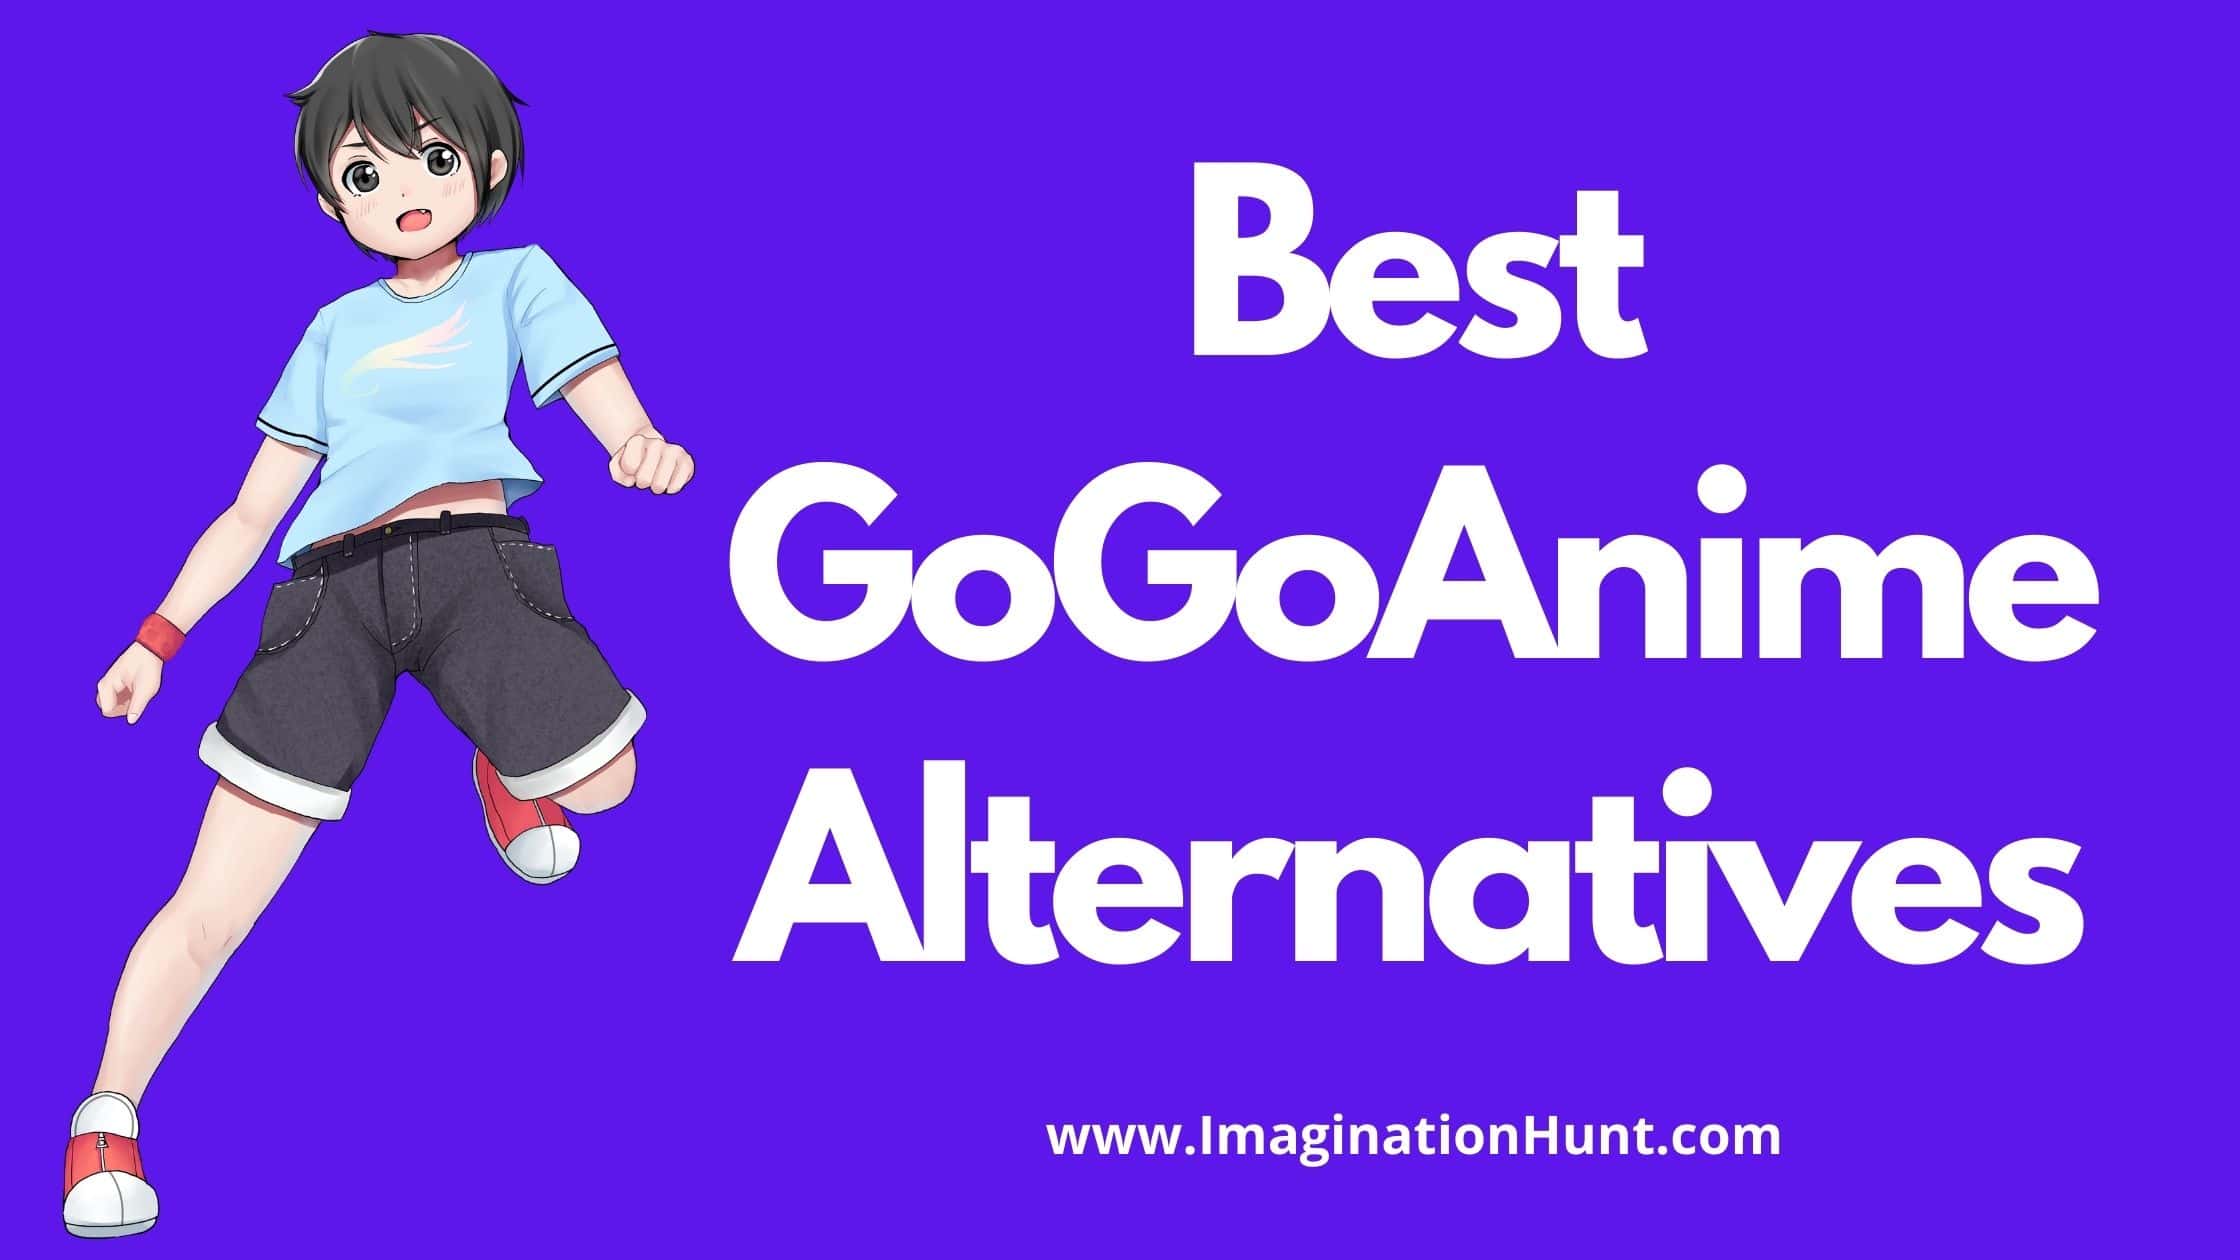 Is GoGoAnime Safe? - Which GoGoAnime is Real with Alternatives 2021